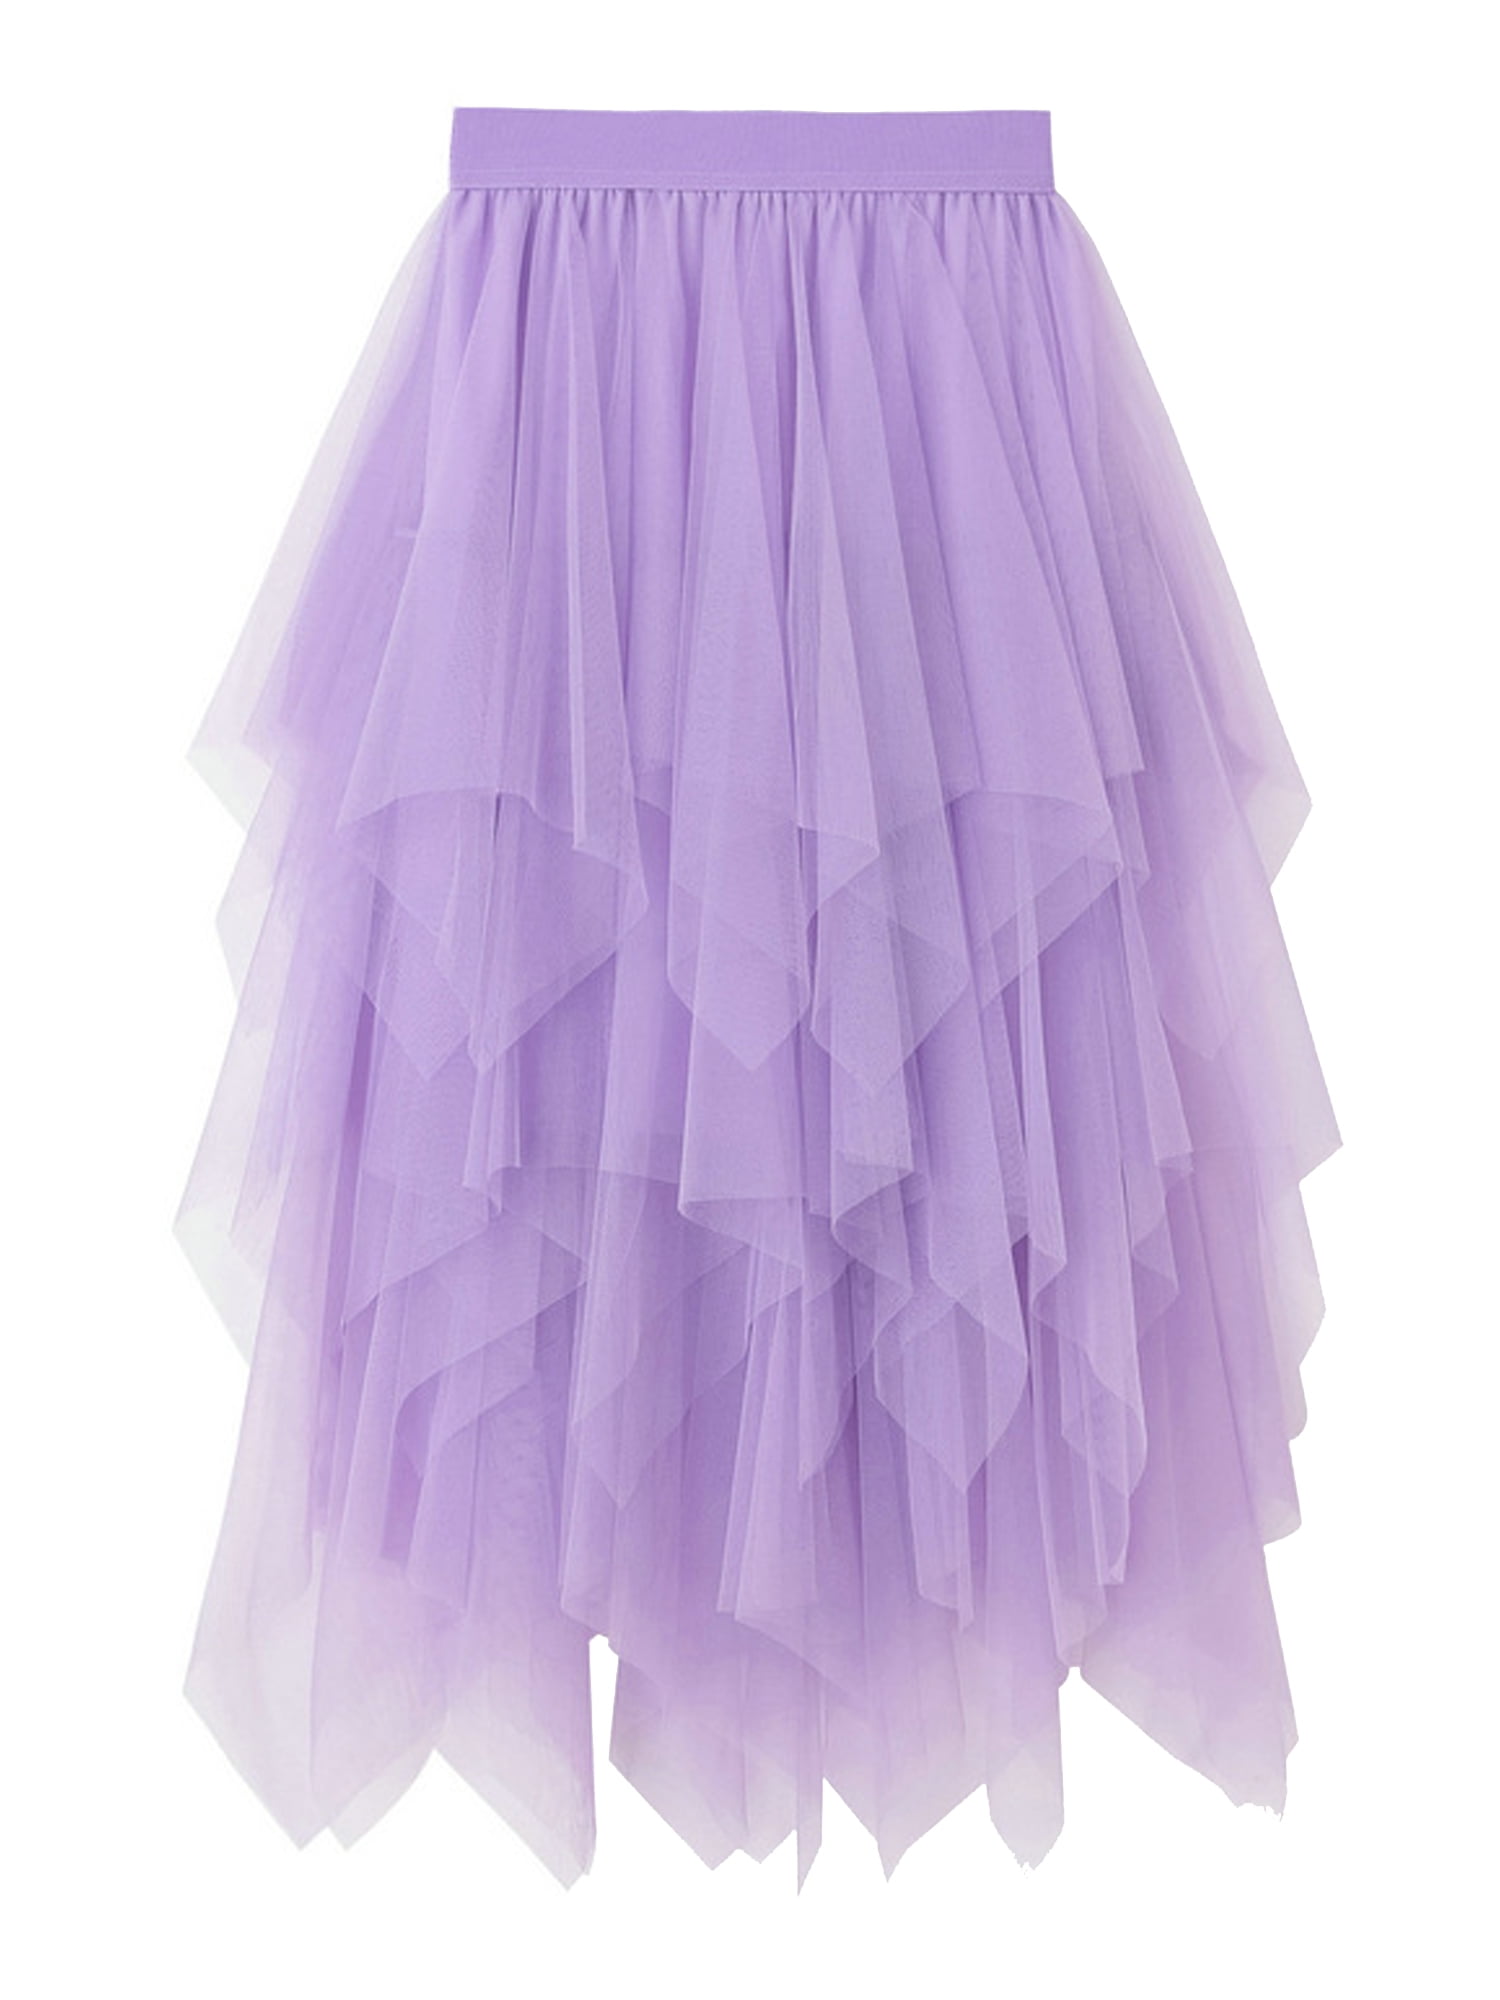 Womens Tiered Layered Mesh Tulle Skirt High Low Asymmetrical Party Tulle Tutu A-line Midi Skirt